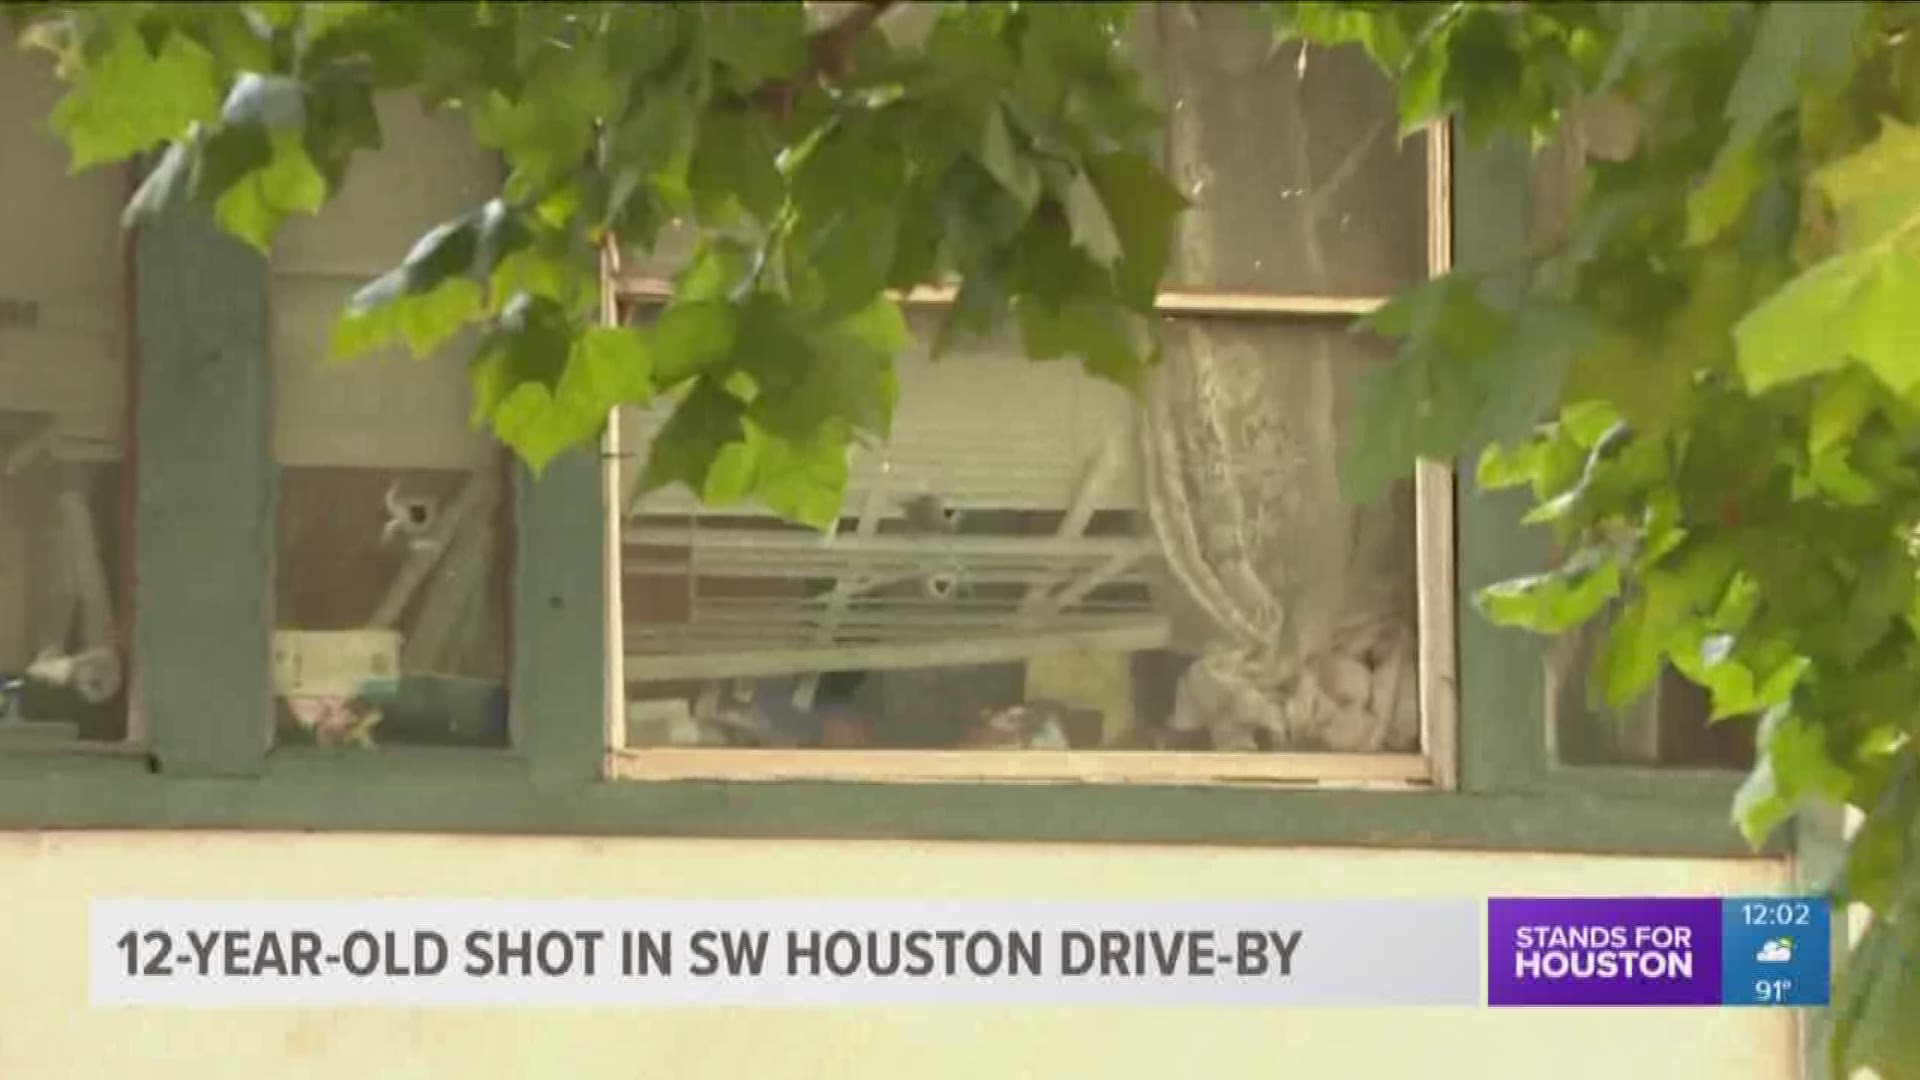 A 12-year-old girl was grazed by a stray bullet during a drive-by shooting in southwest Houston overnight.